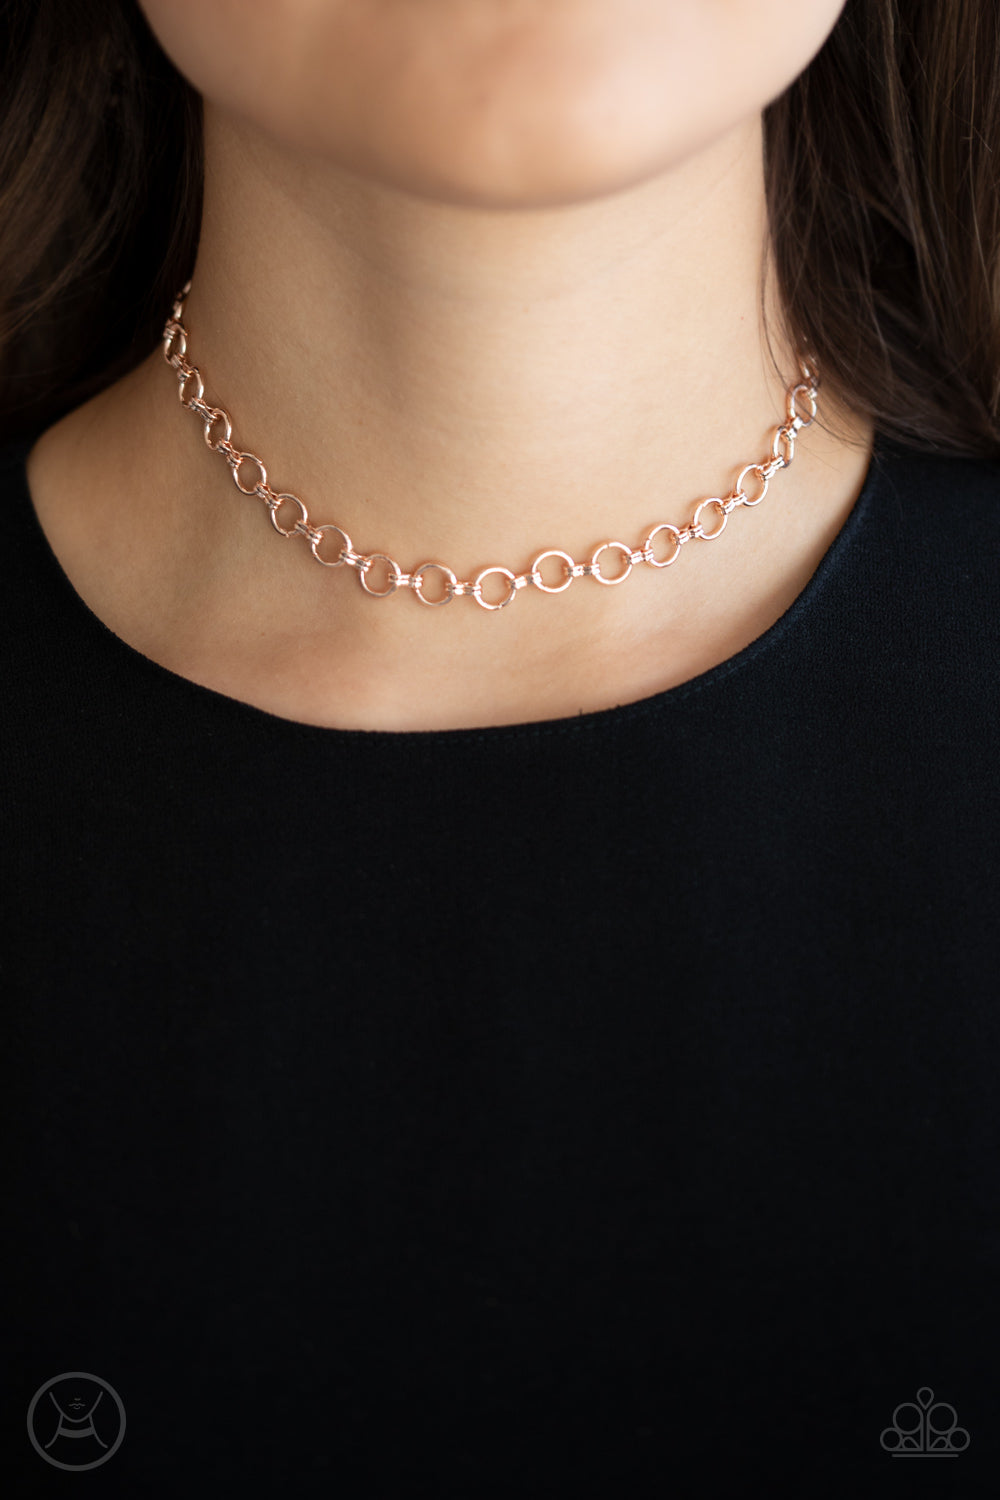 Paparazzi - Insta Connection - Rose Gold Necklace